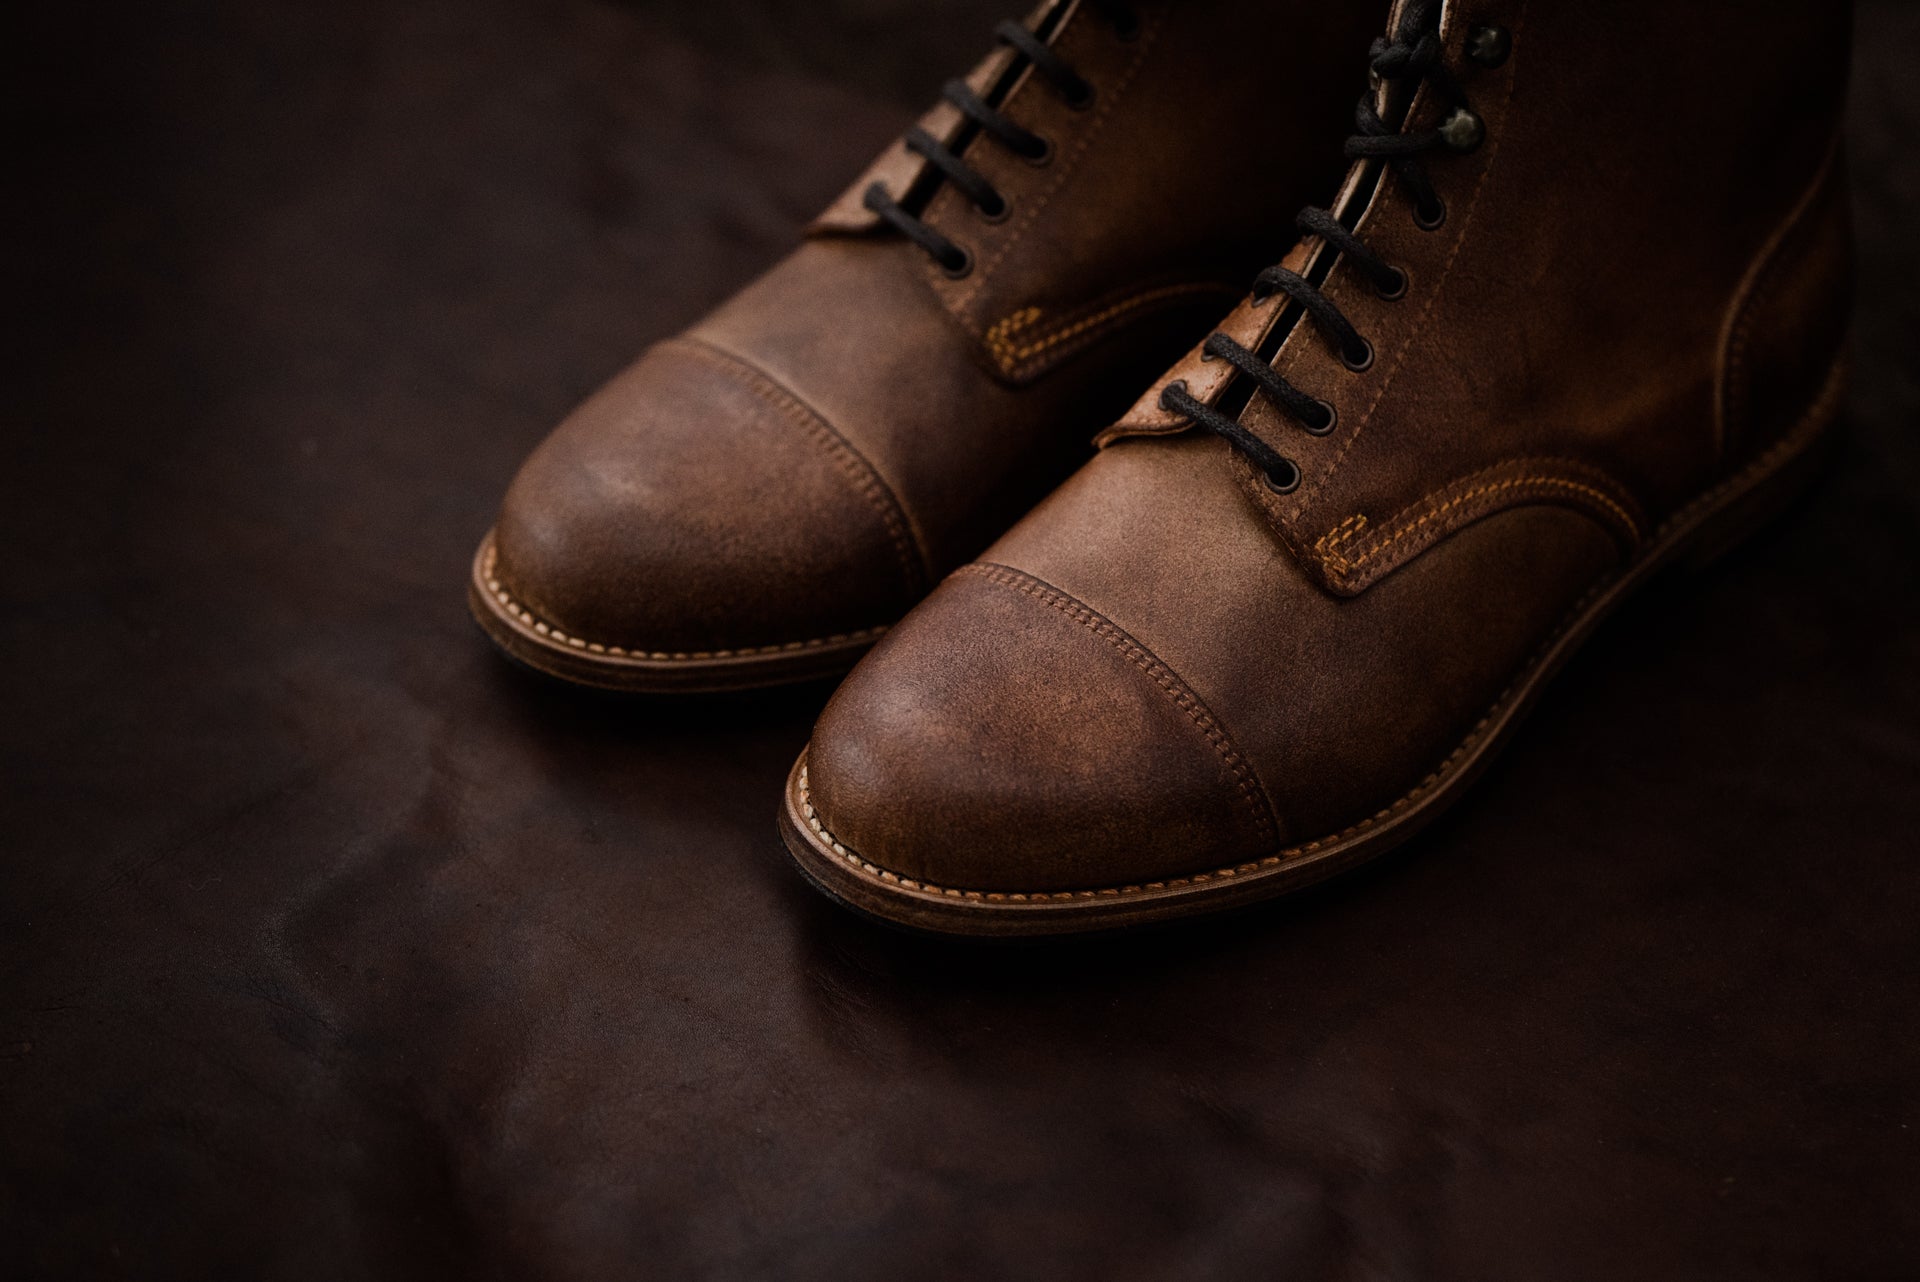 Tejo Premium Boots - OldMulla - Boots Store, Handmade By George